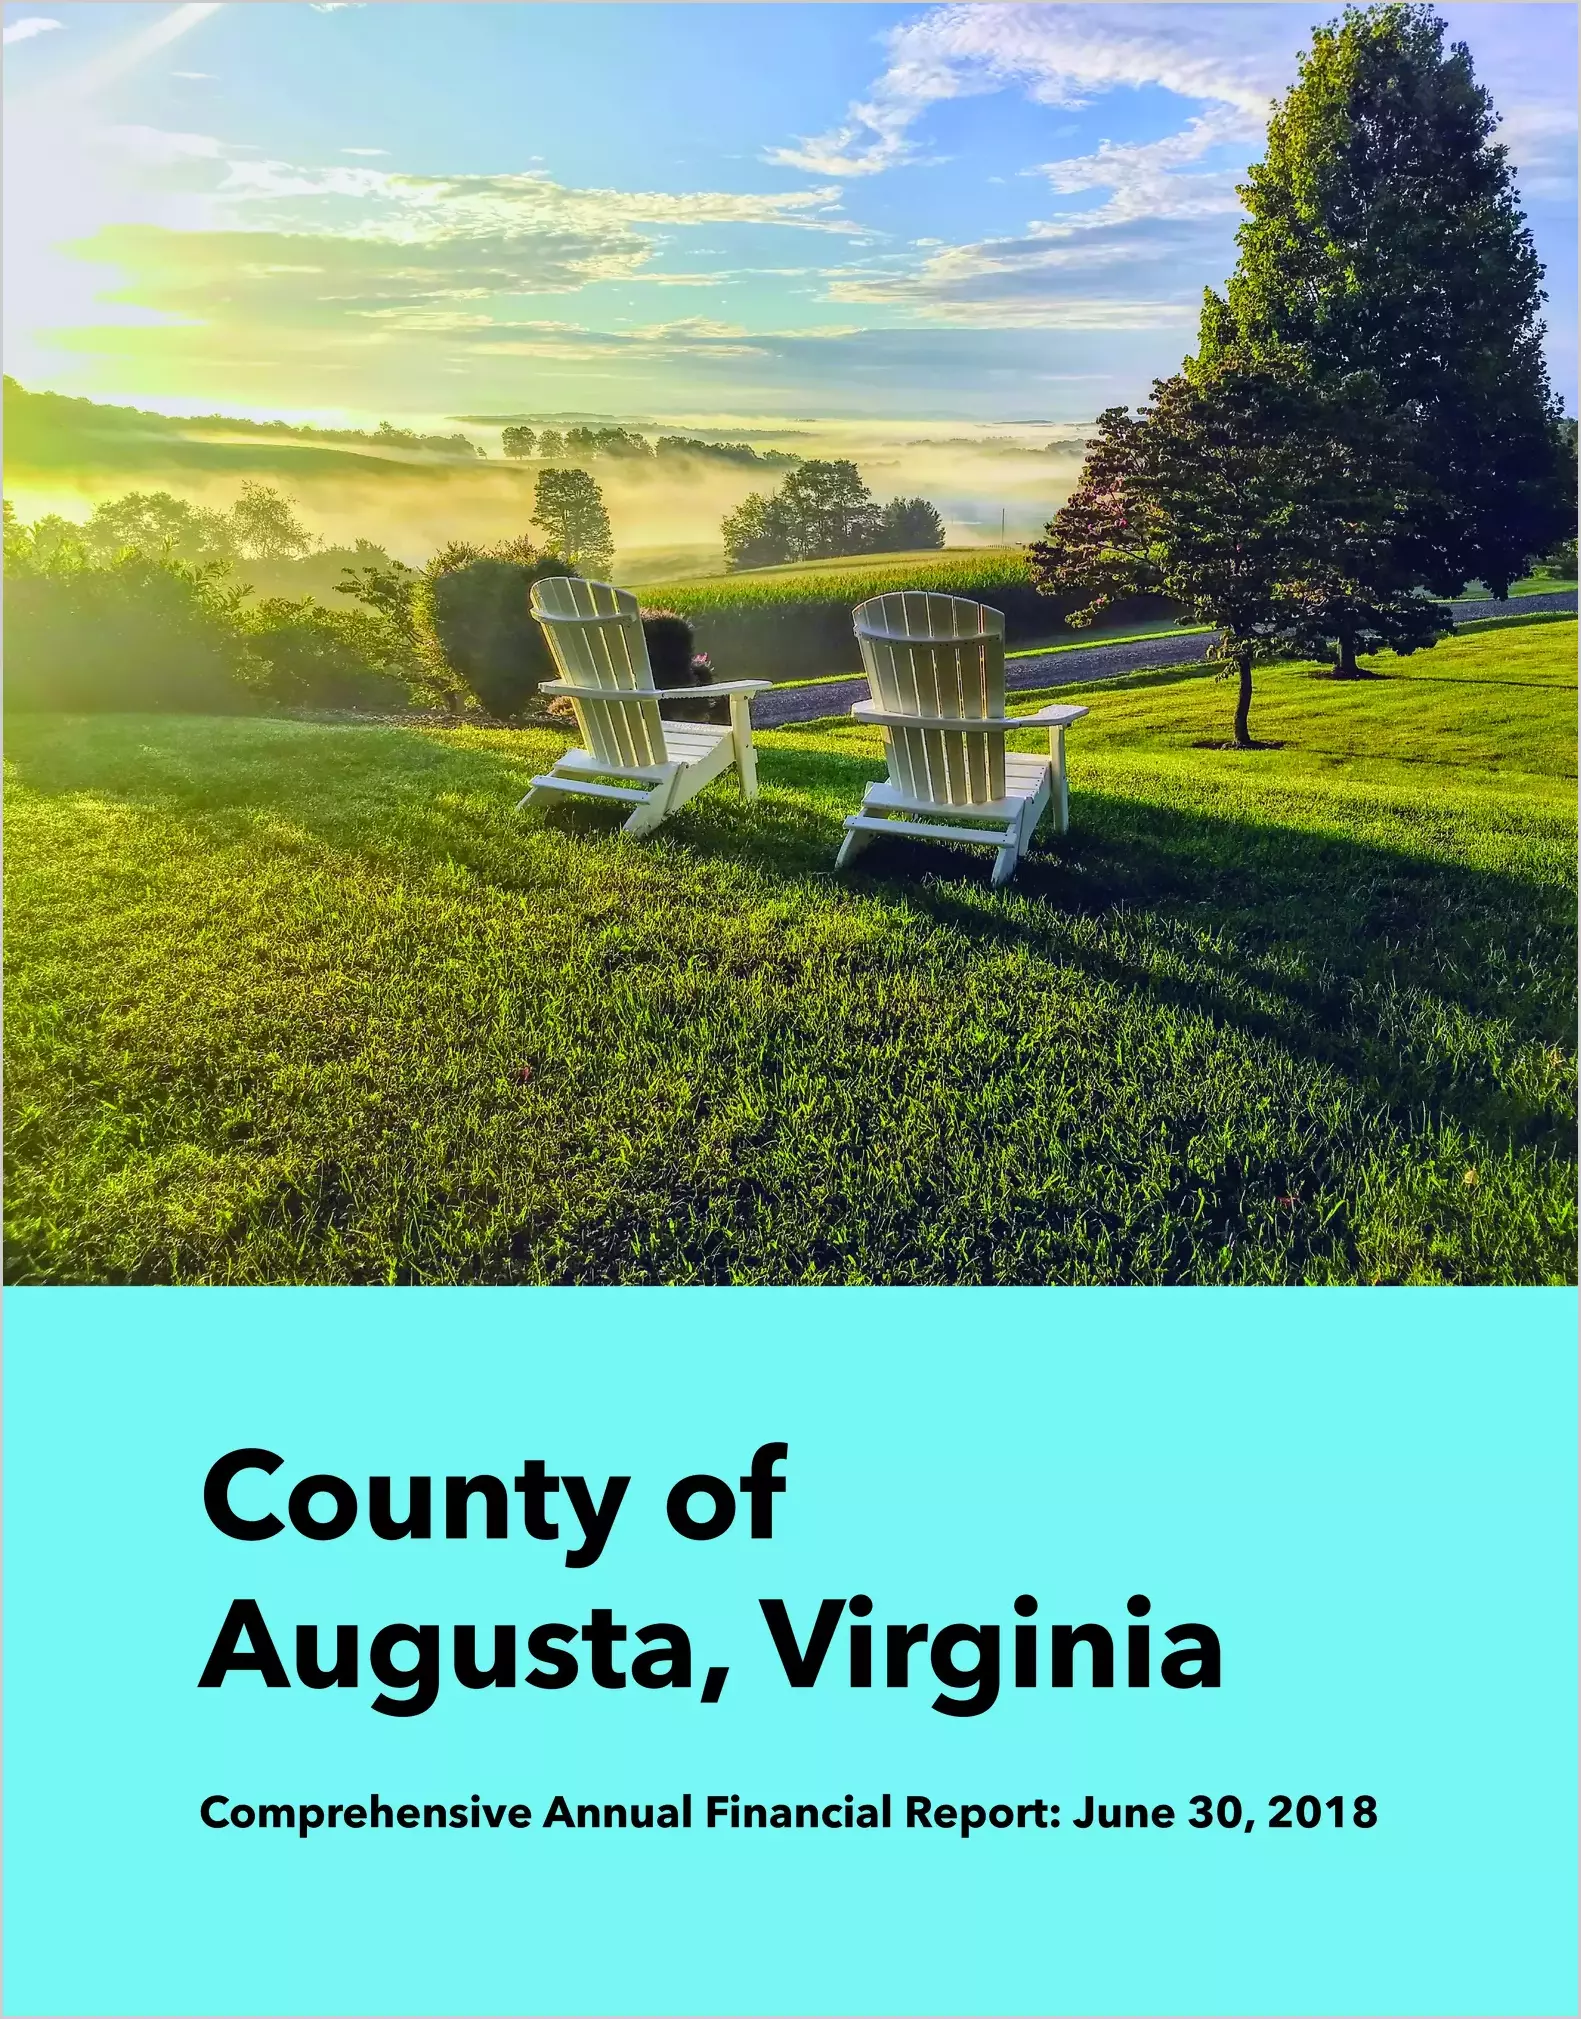 2018 Annual Financial Report for County of Augusta